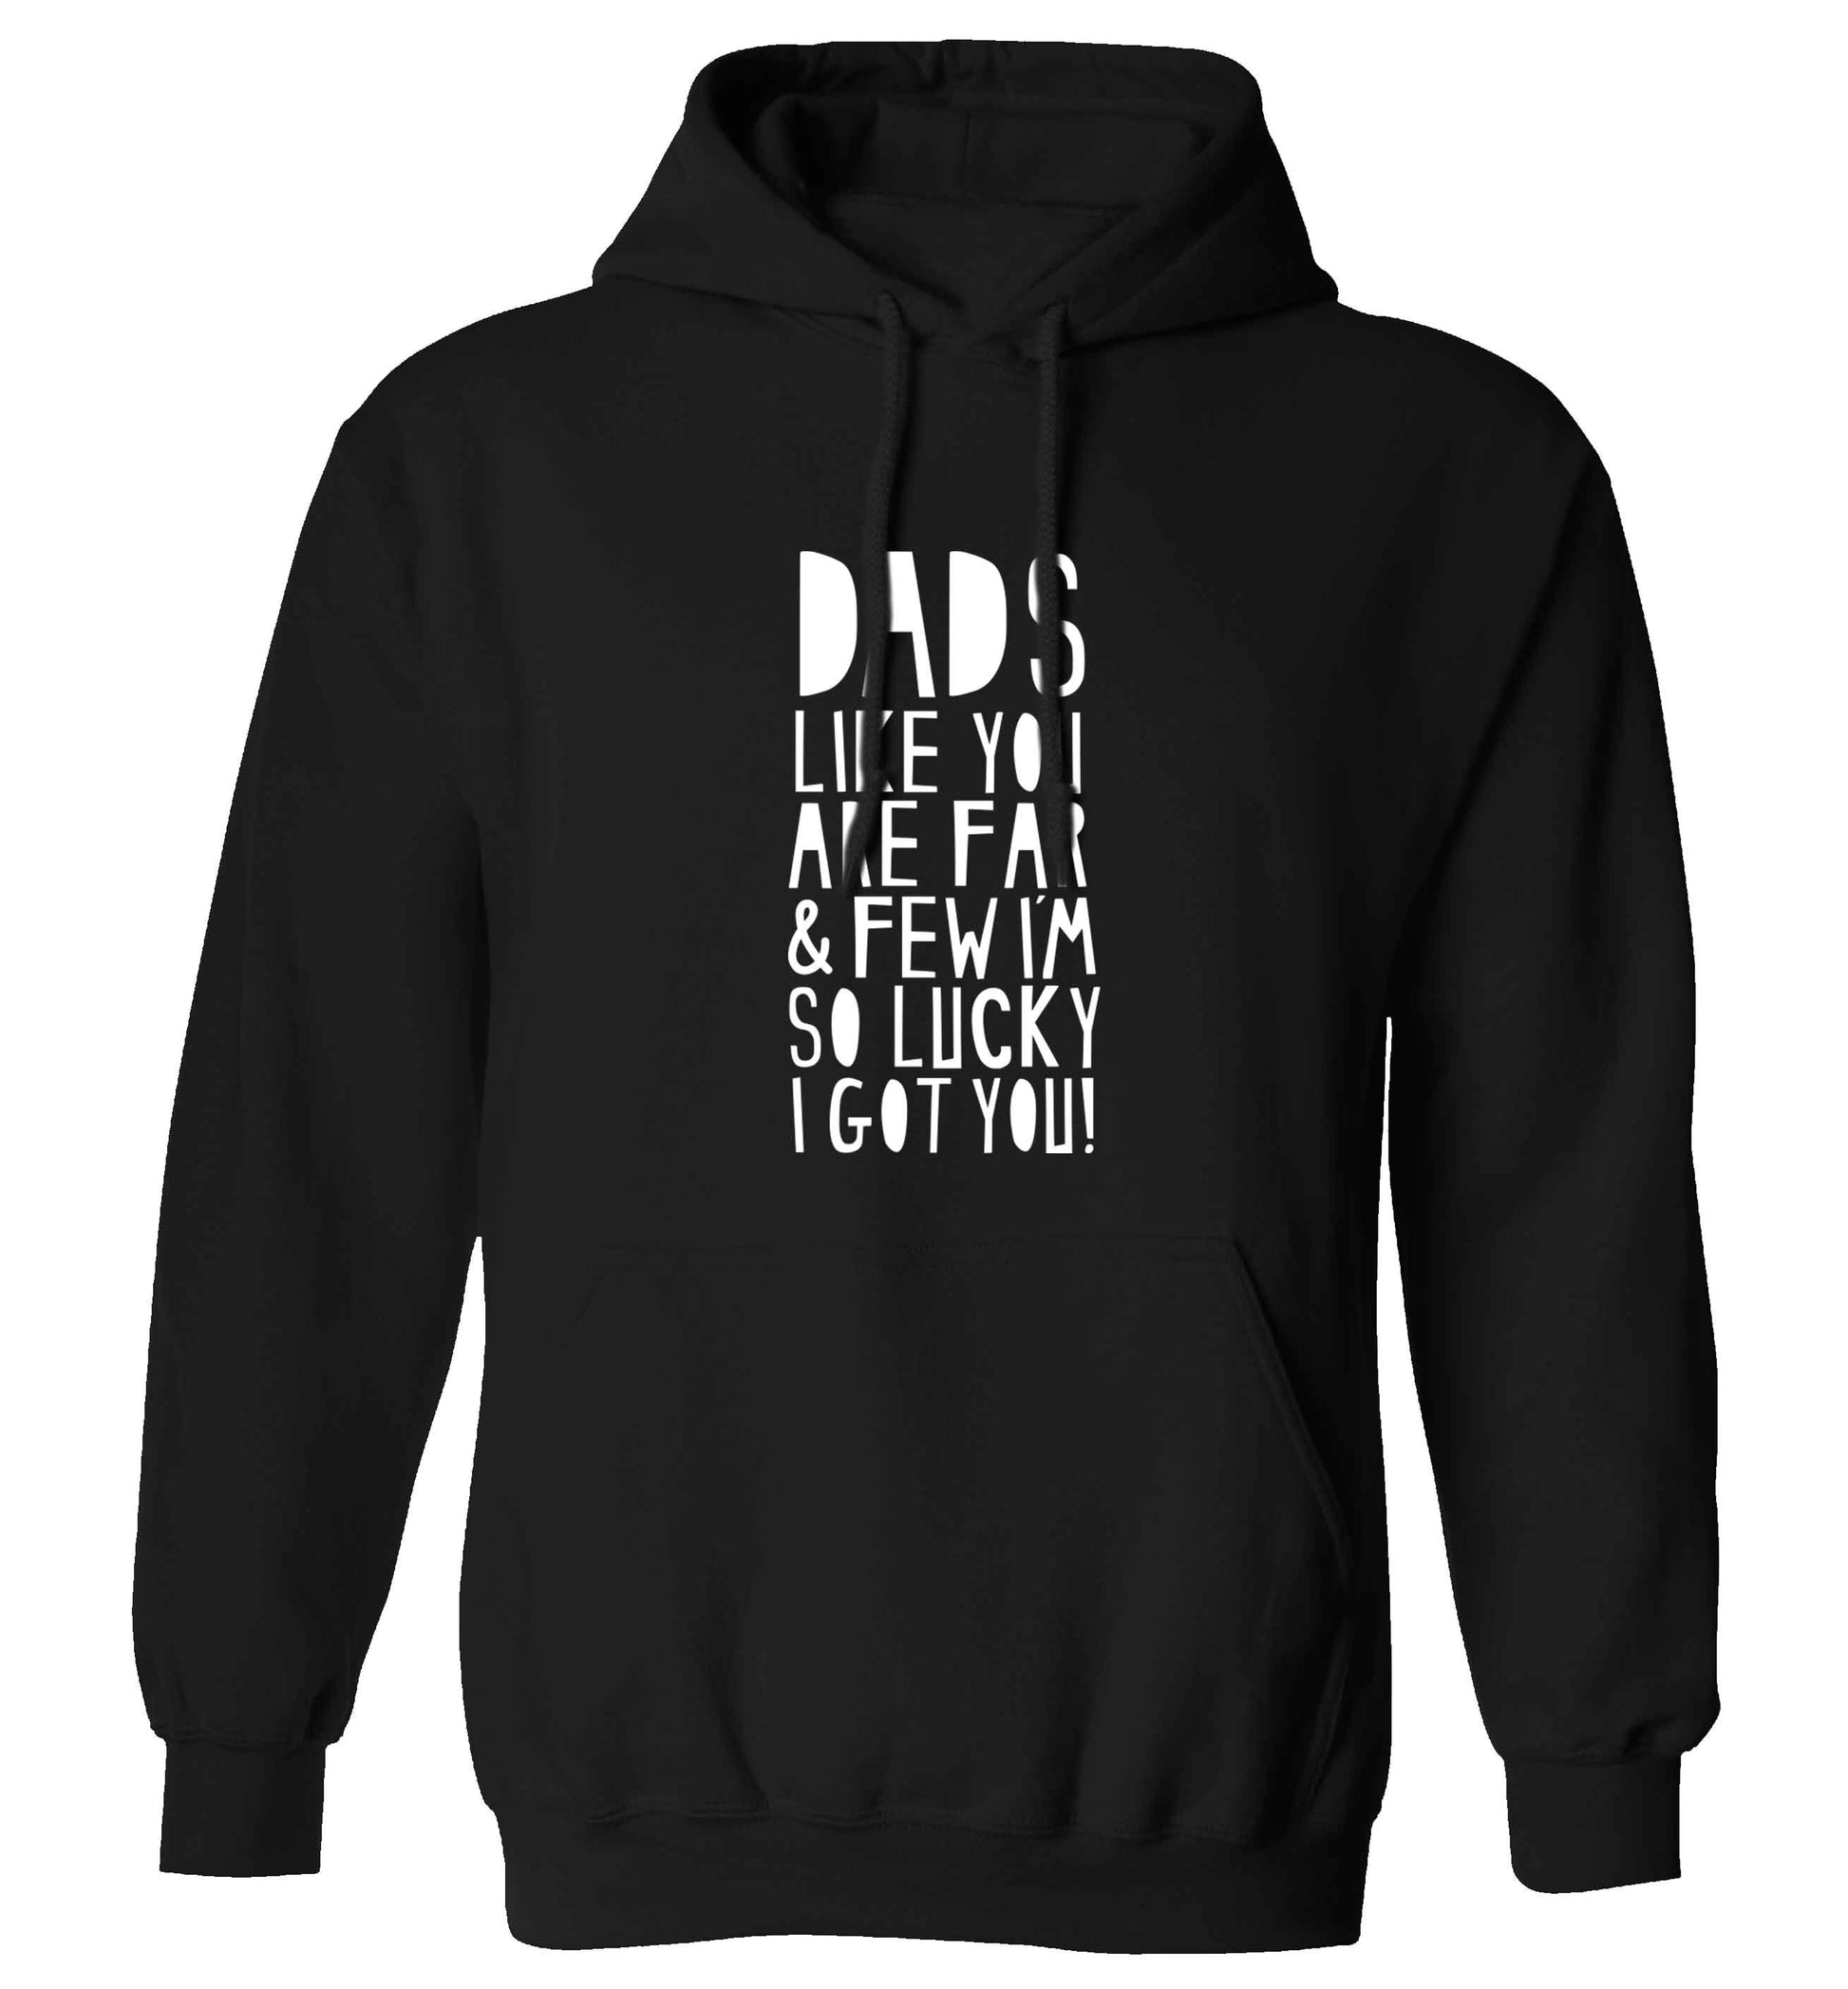 Dads like you are far and few I'm so luck I got you! adults unisex black hoodie 2XL